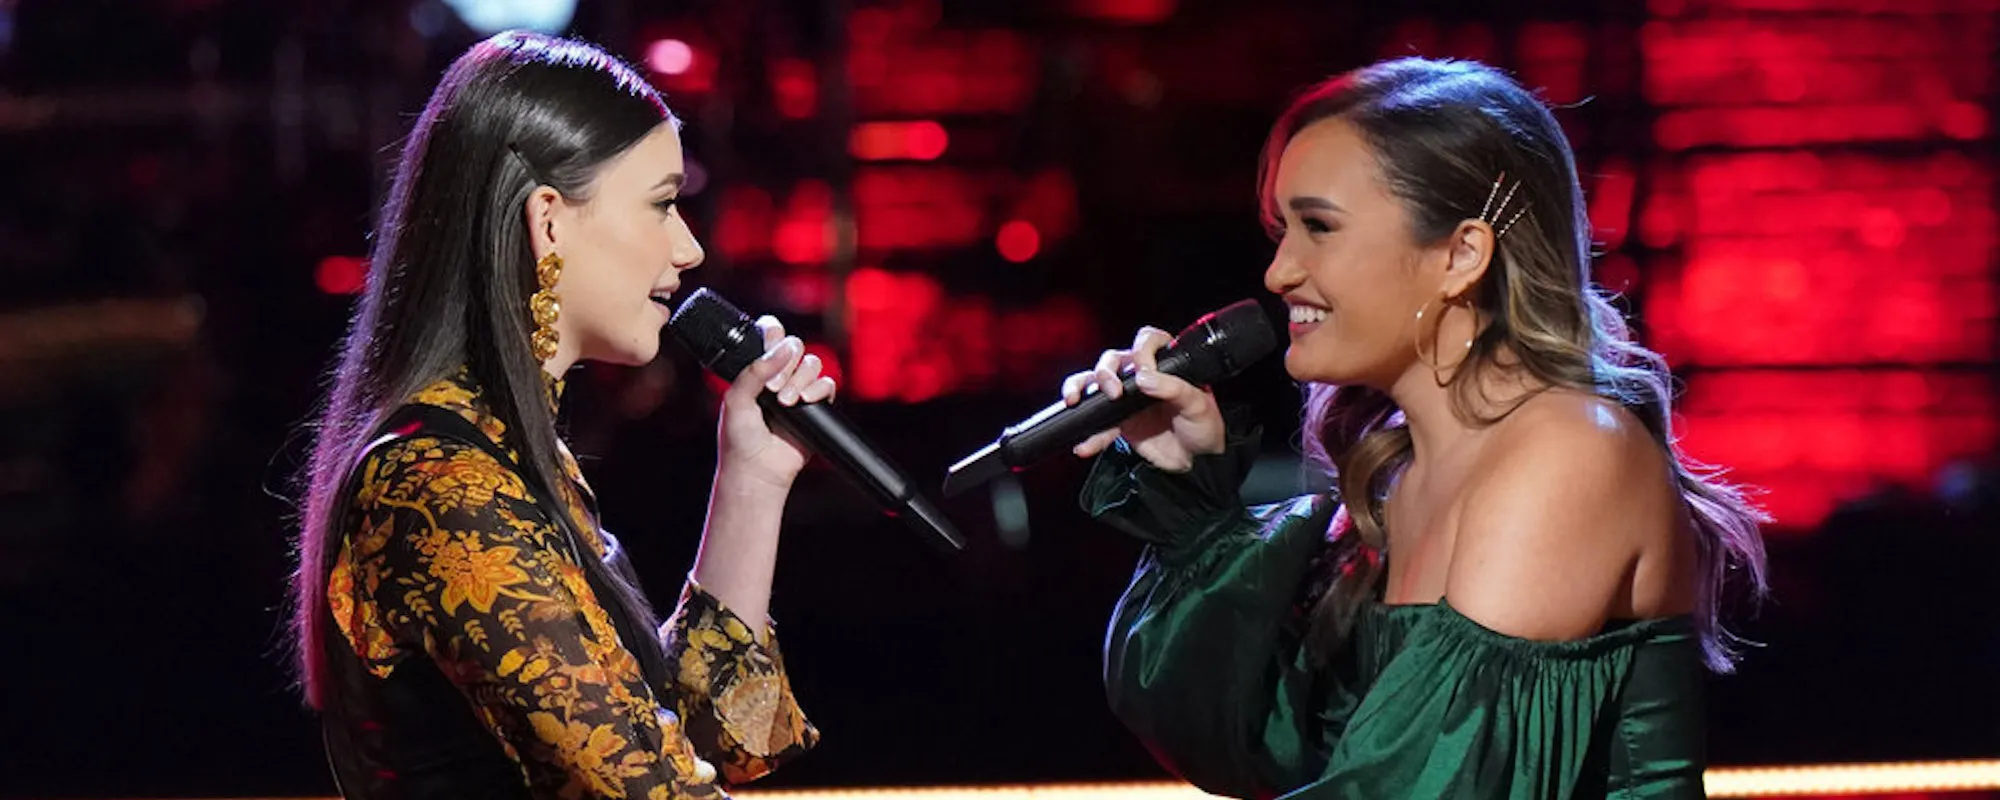 Emotions Swell on ‘The Voice’ Over Cover of Bon Iver’s “Skinny Love”